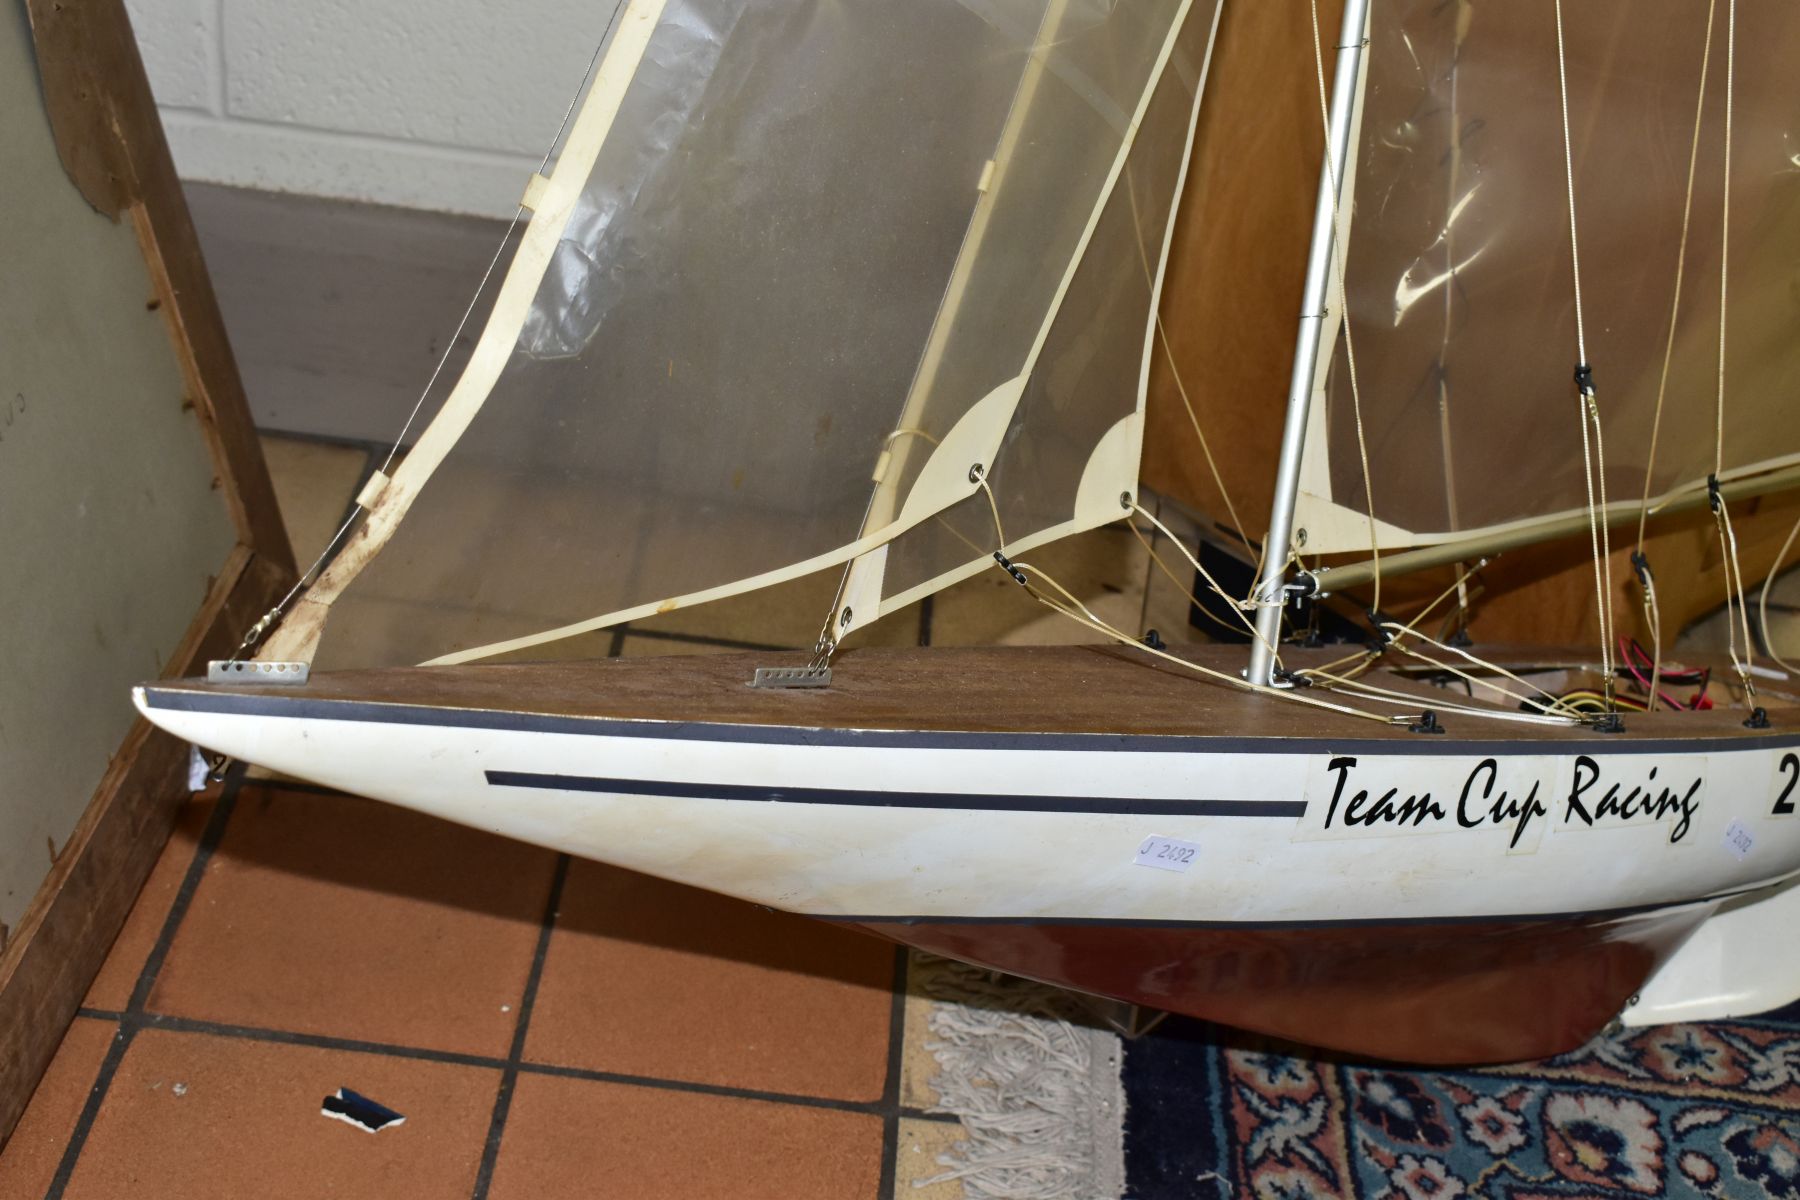 A SCRATCH BUILT MODEL YACHT, at full sail, the deck with rigging and clear sails, motor in hull, - Image 8 of 8